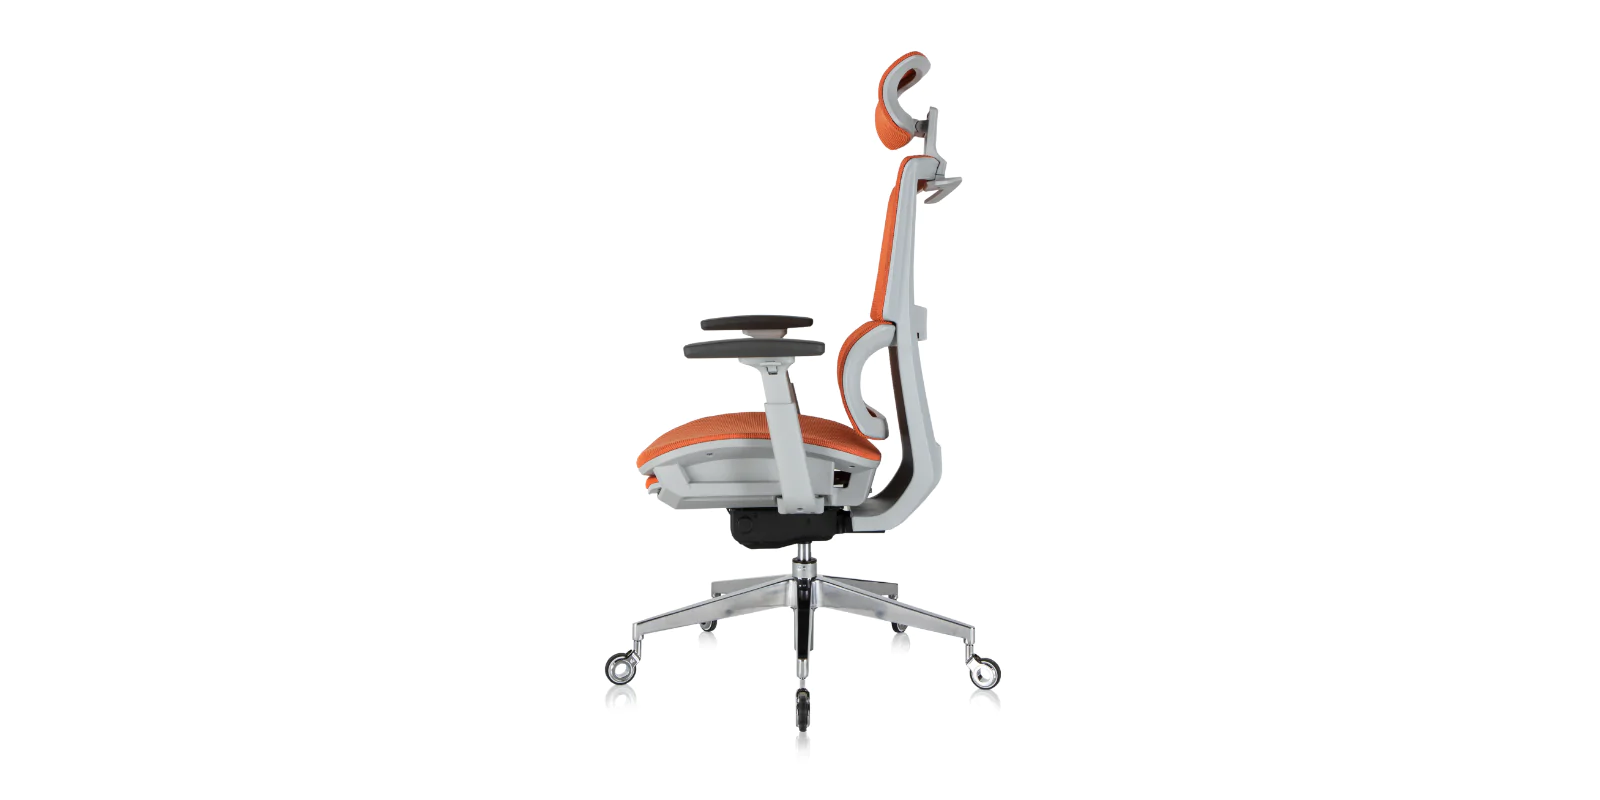 Which office chairs are best for sitting long hours?